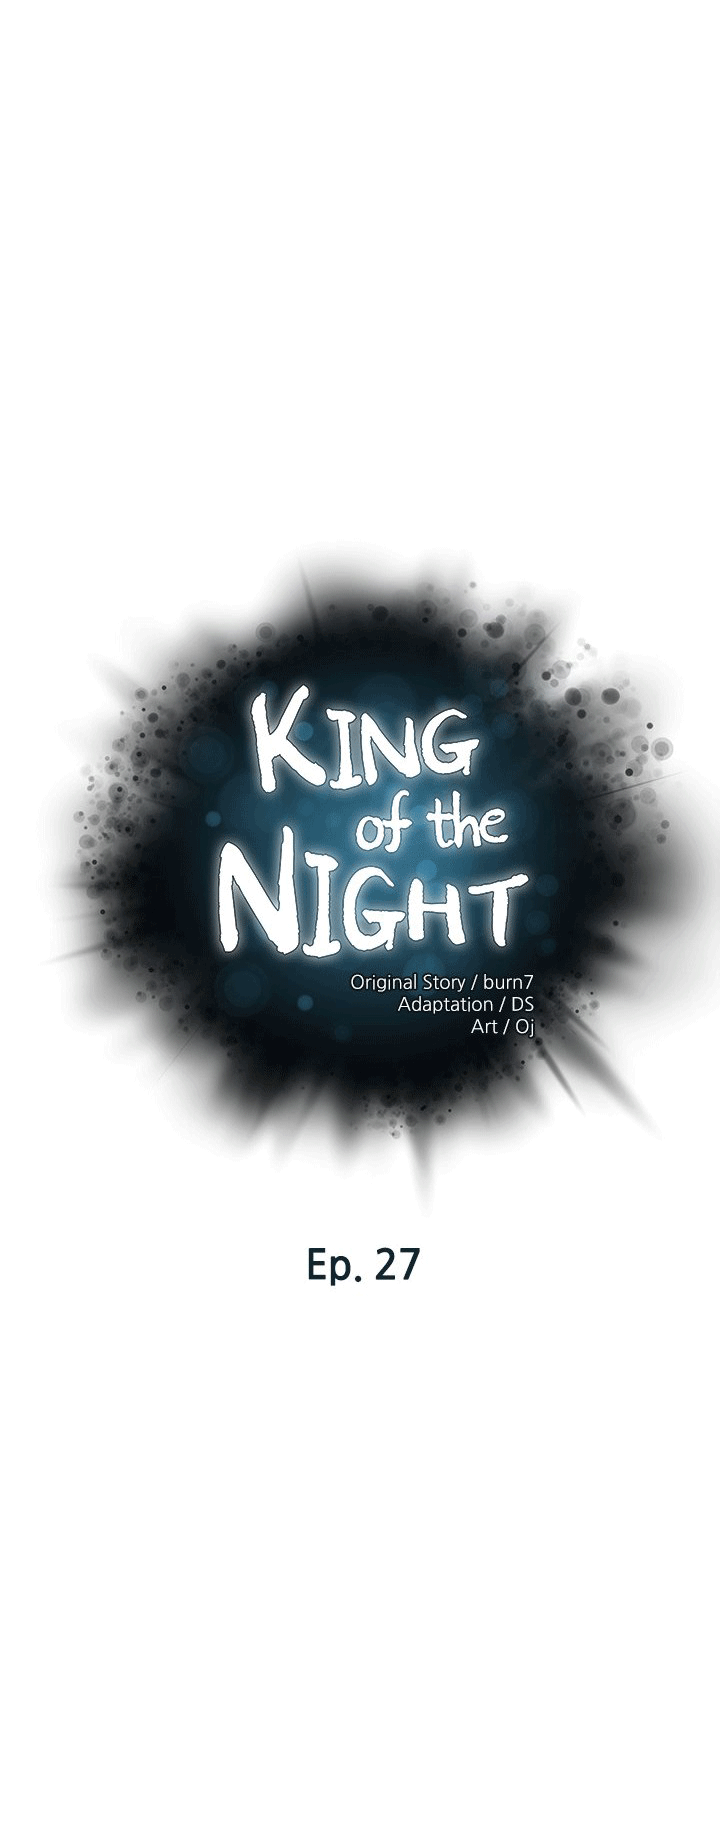 King of the Night 27 01